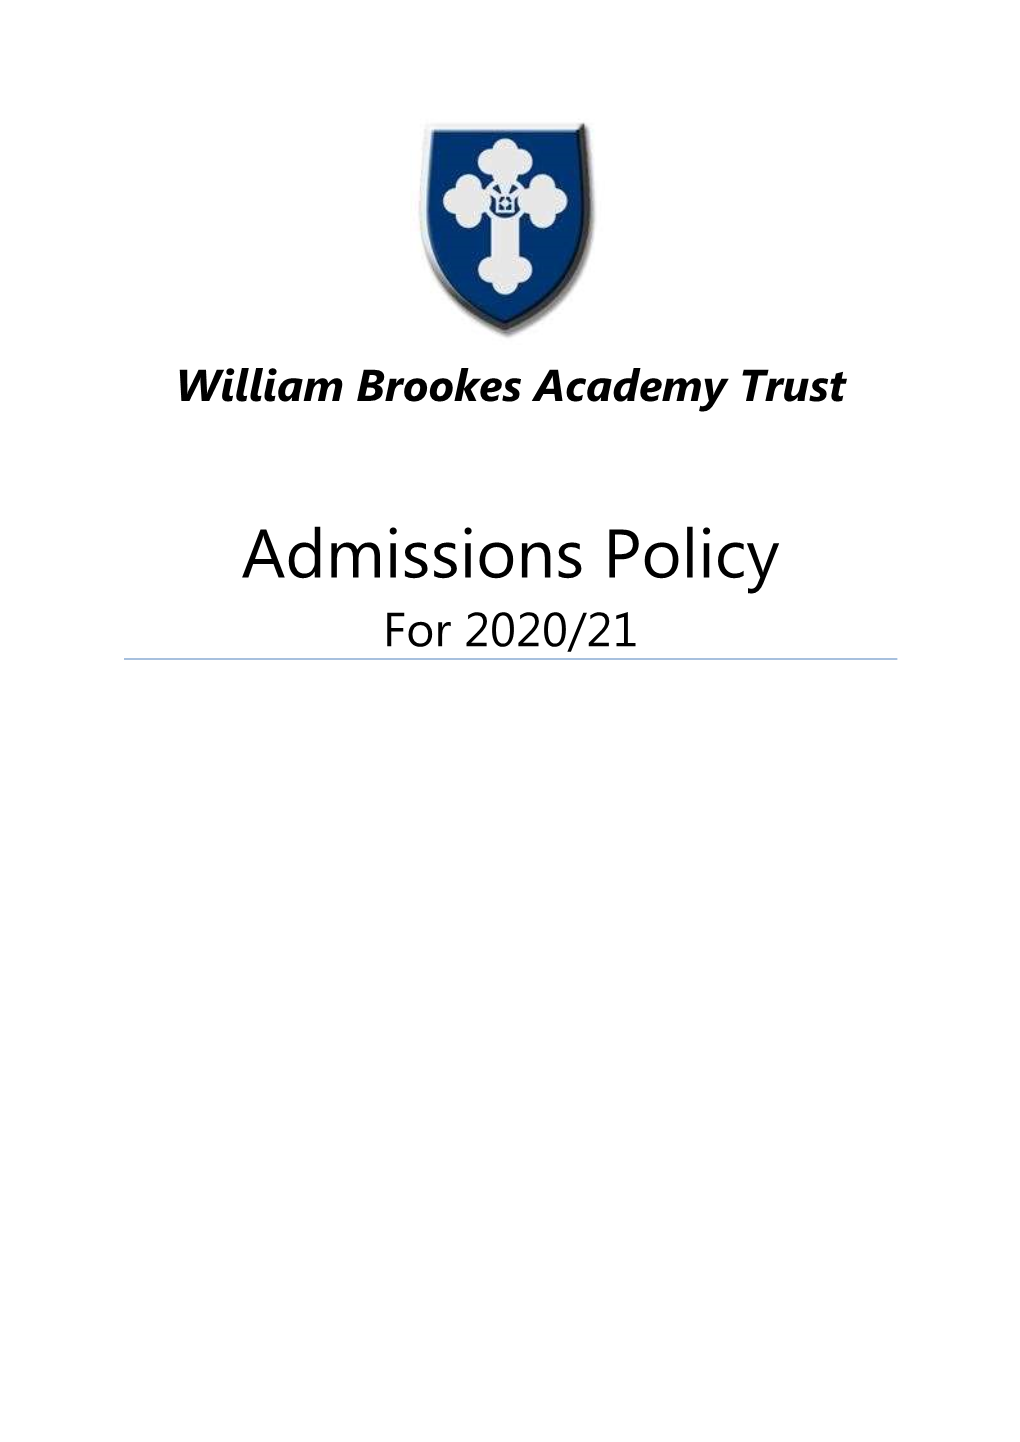 Admissions Policy for 2020/21